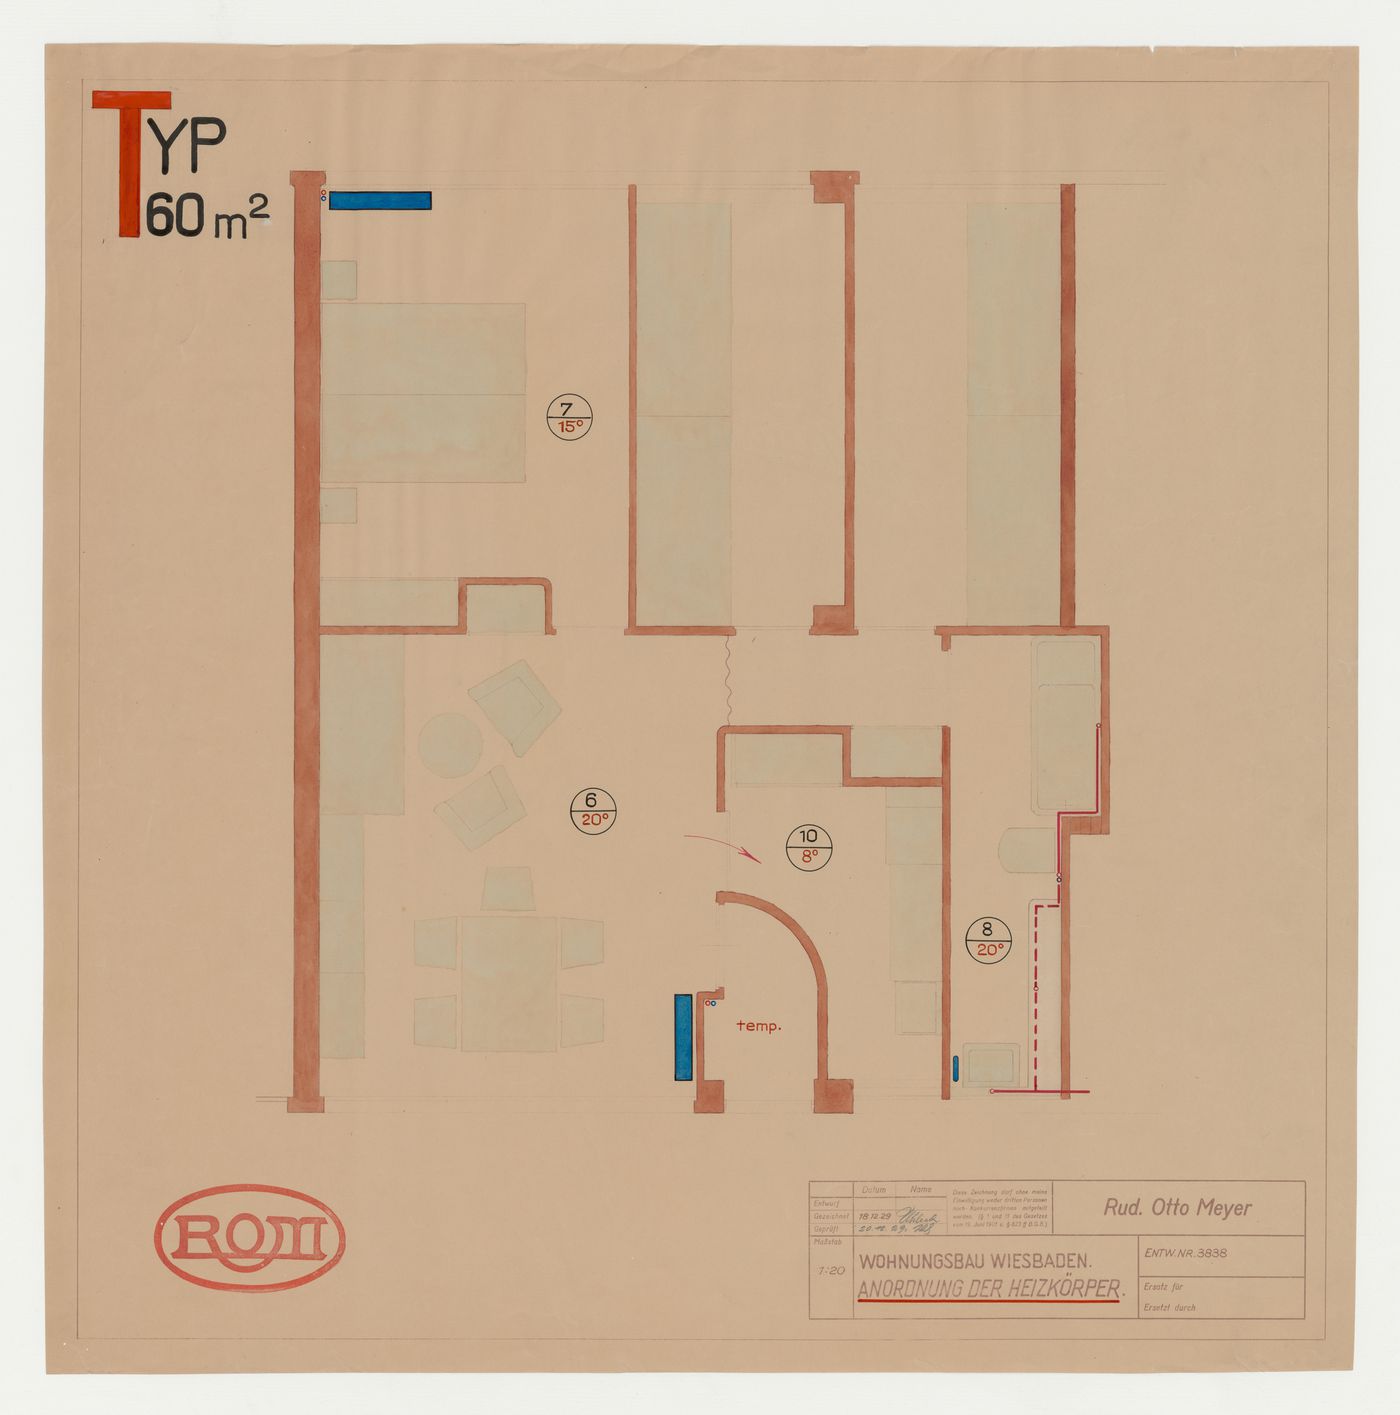 Plan for a housing unit showing radiator heating system, Wiesbaden, Germany